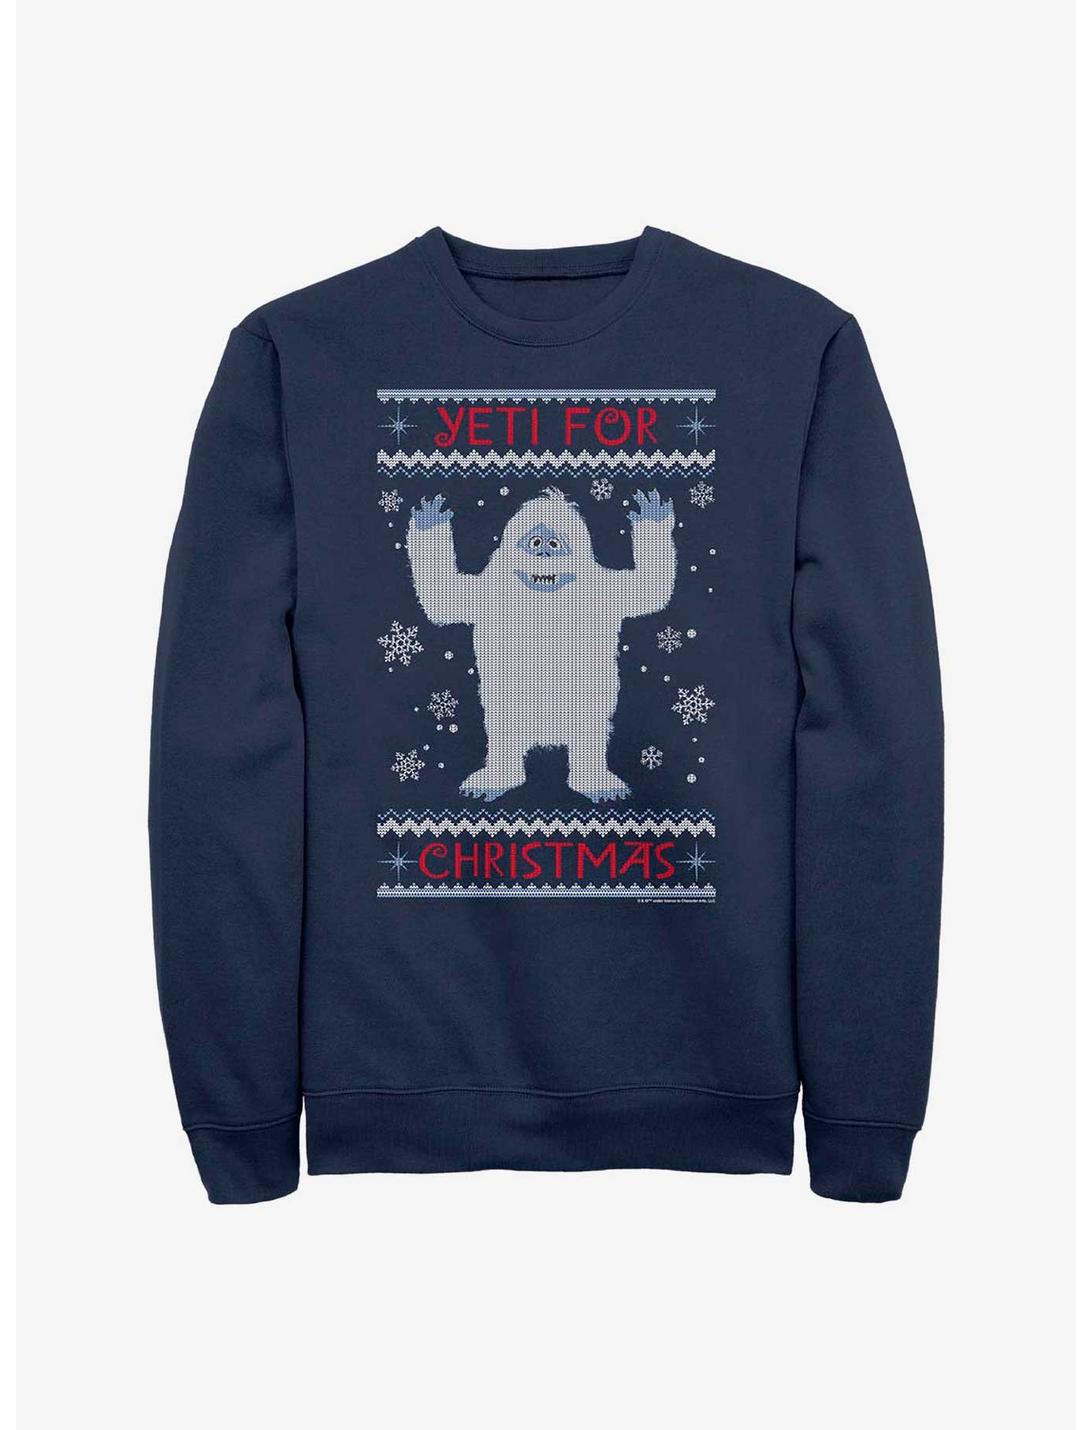 Rudolph The Red-Nosed Reindeer Yeti For Christmas Ugly Sweater Sweatshirt, NAVY, hi-res